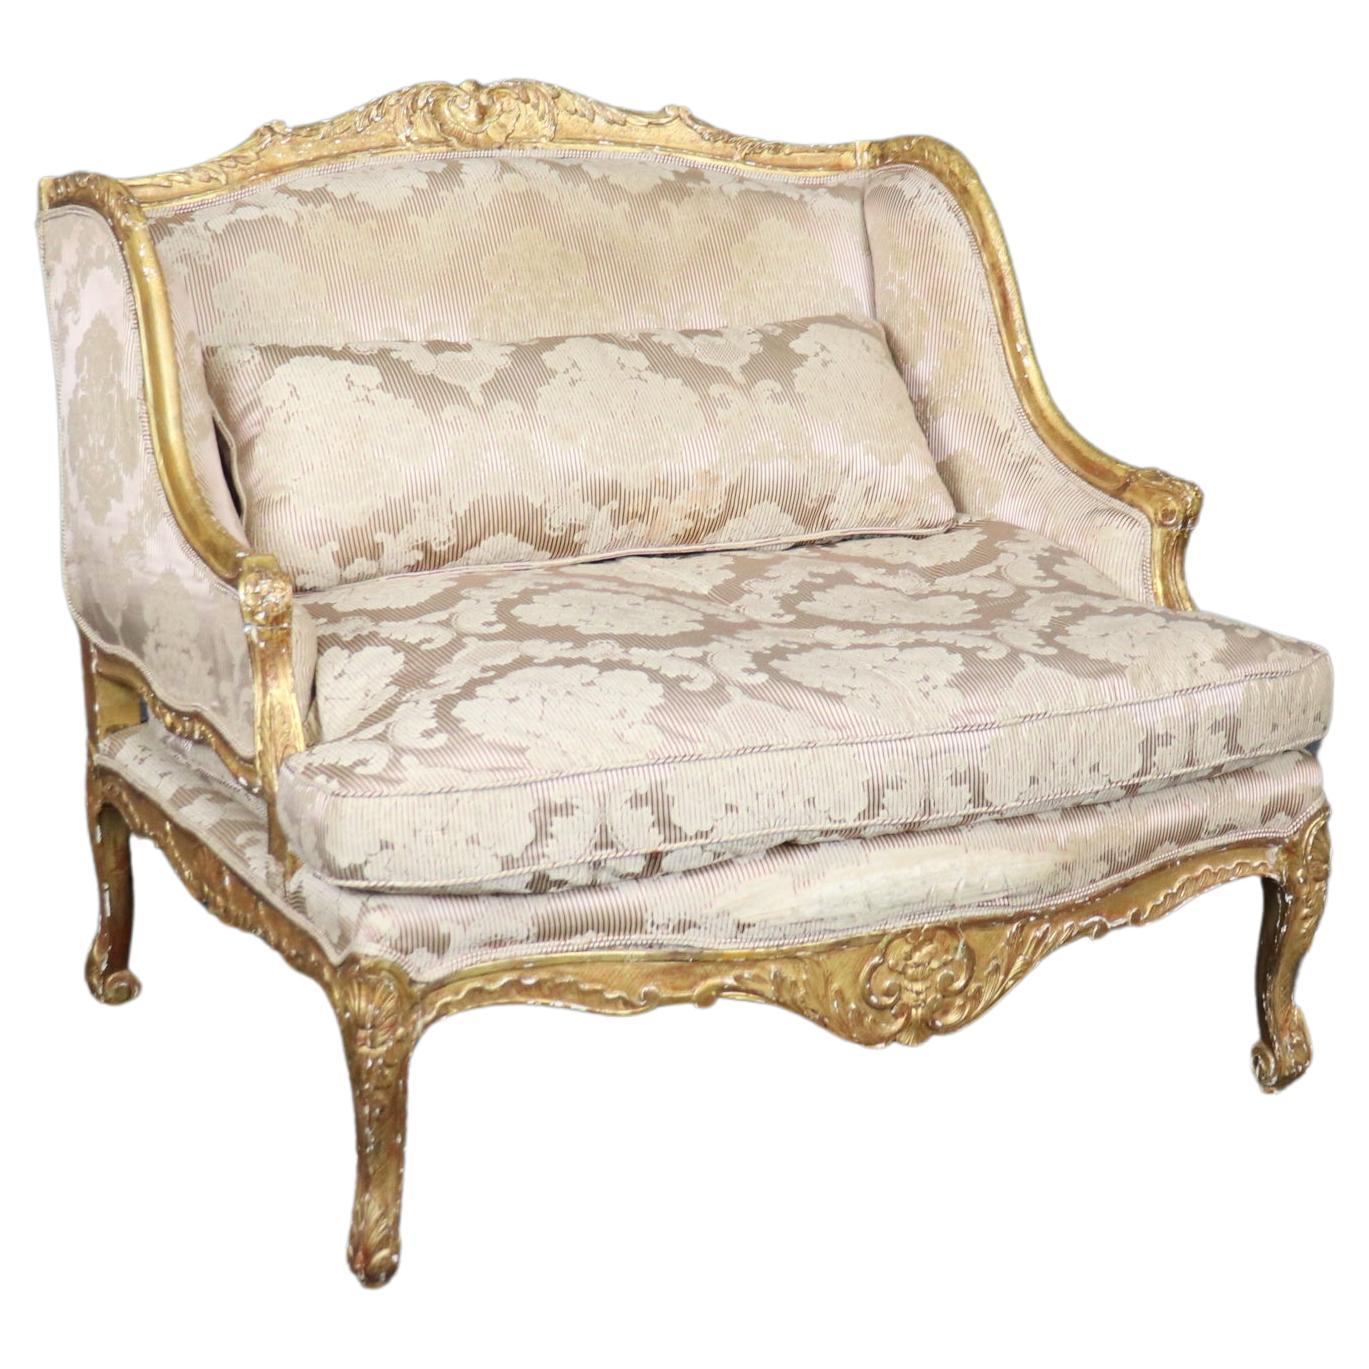 Superb 19th century French Gilded Louis XV Style Marquis Bergere Chair  For Sale